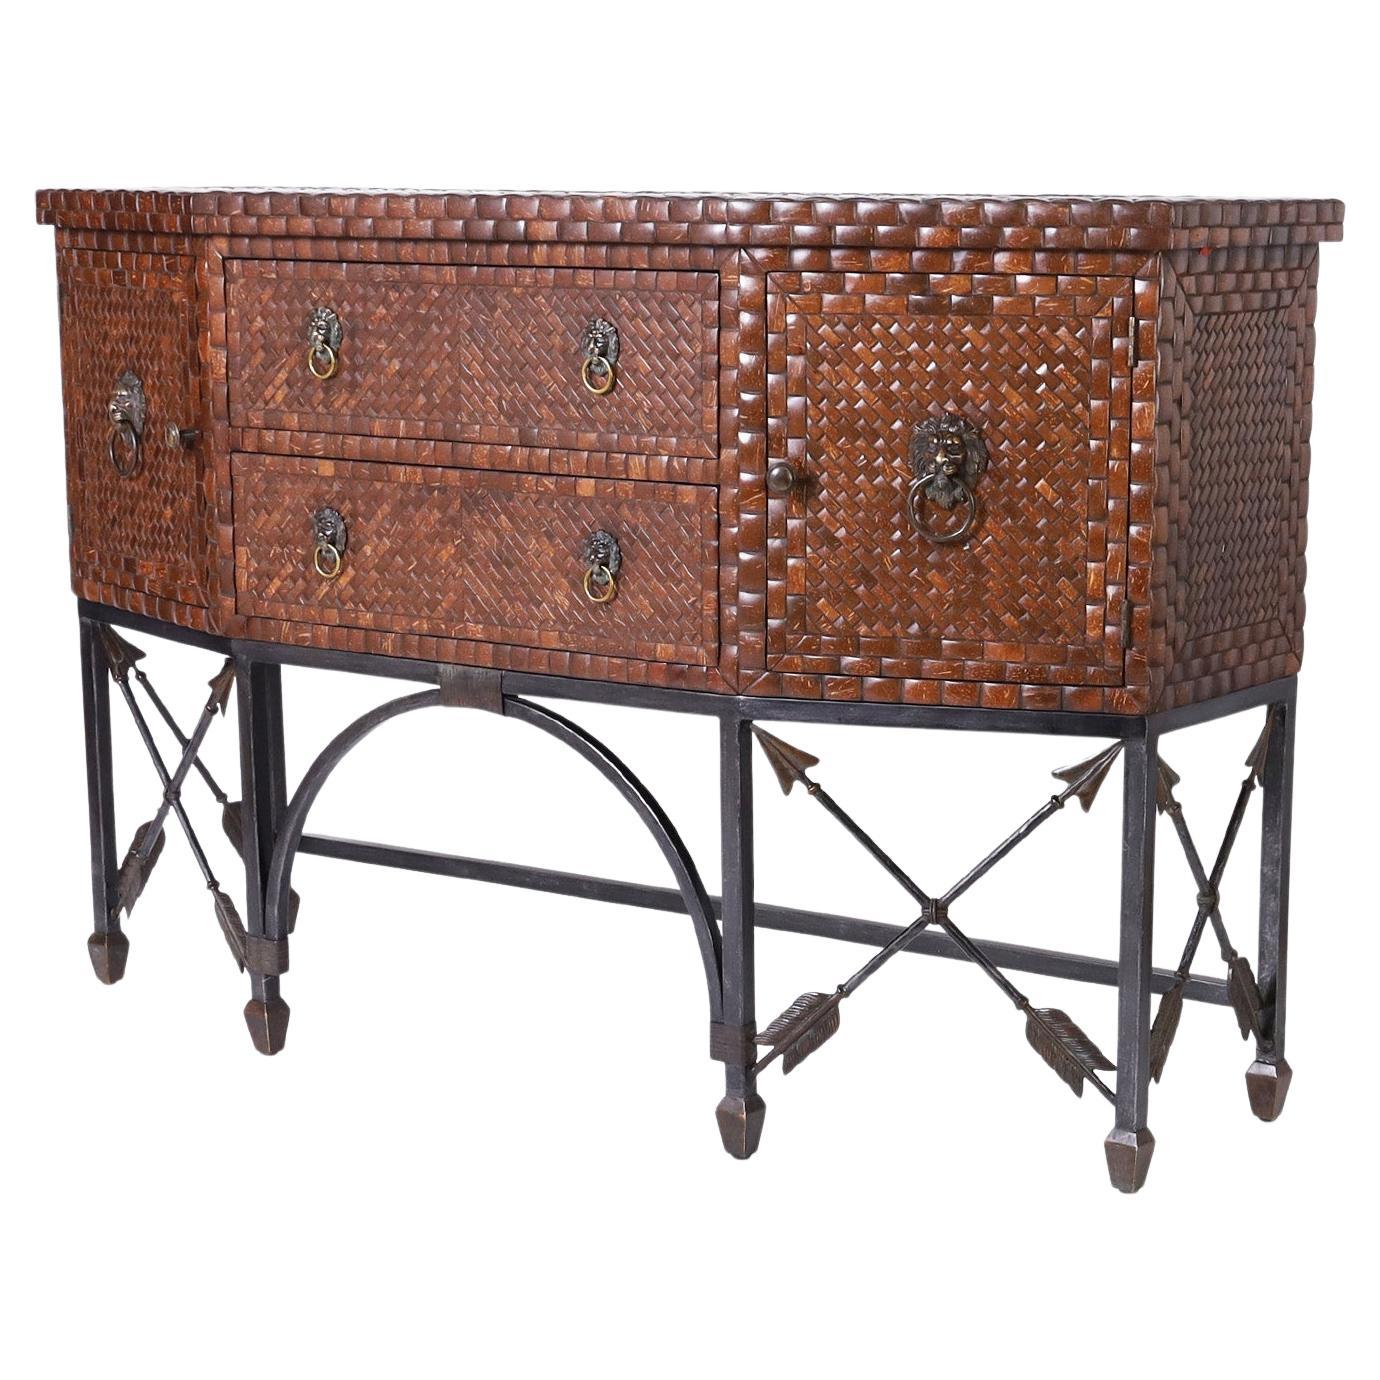 Impressive midcentury sideboard or server having a case with a bronze abstract mosaic top and polished coconut sides and front with two drawers and two doors having Classic lionhead hardware. The neoclassic iron base has crossed arrow motifs.